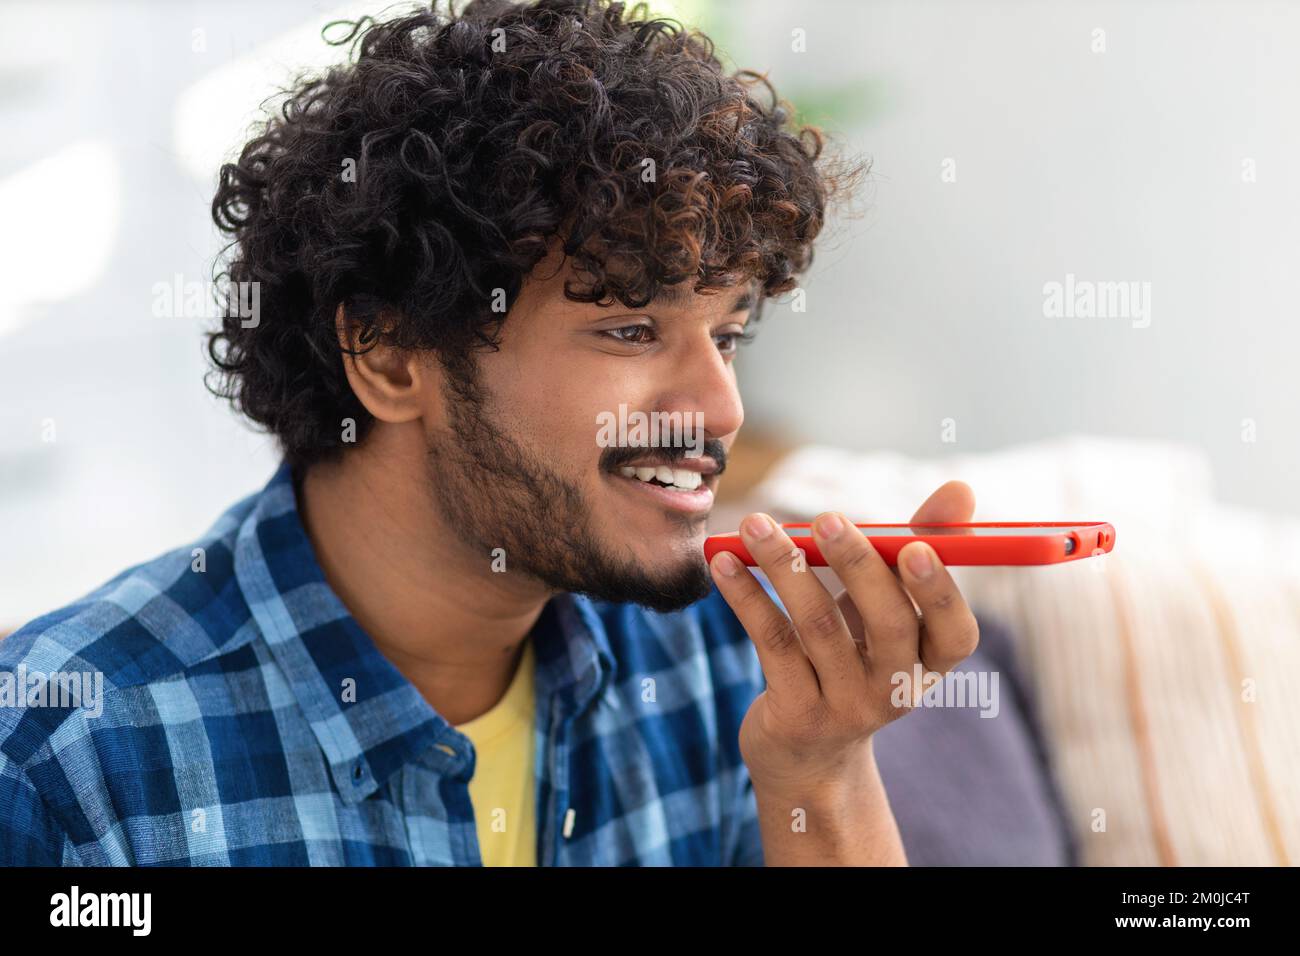 young Asian man sending voice message through using mobile phone close-up, smiling friendly Stock Photo